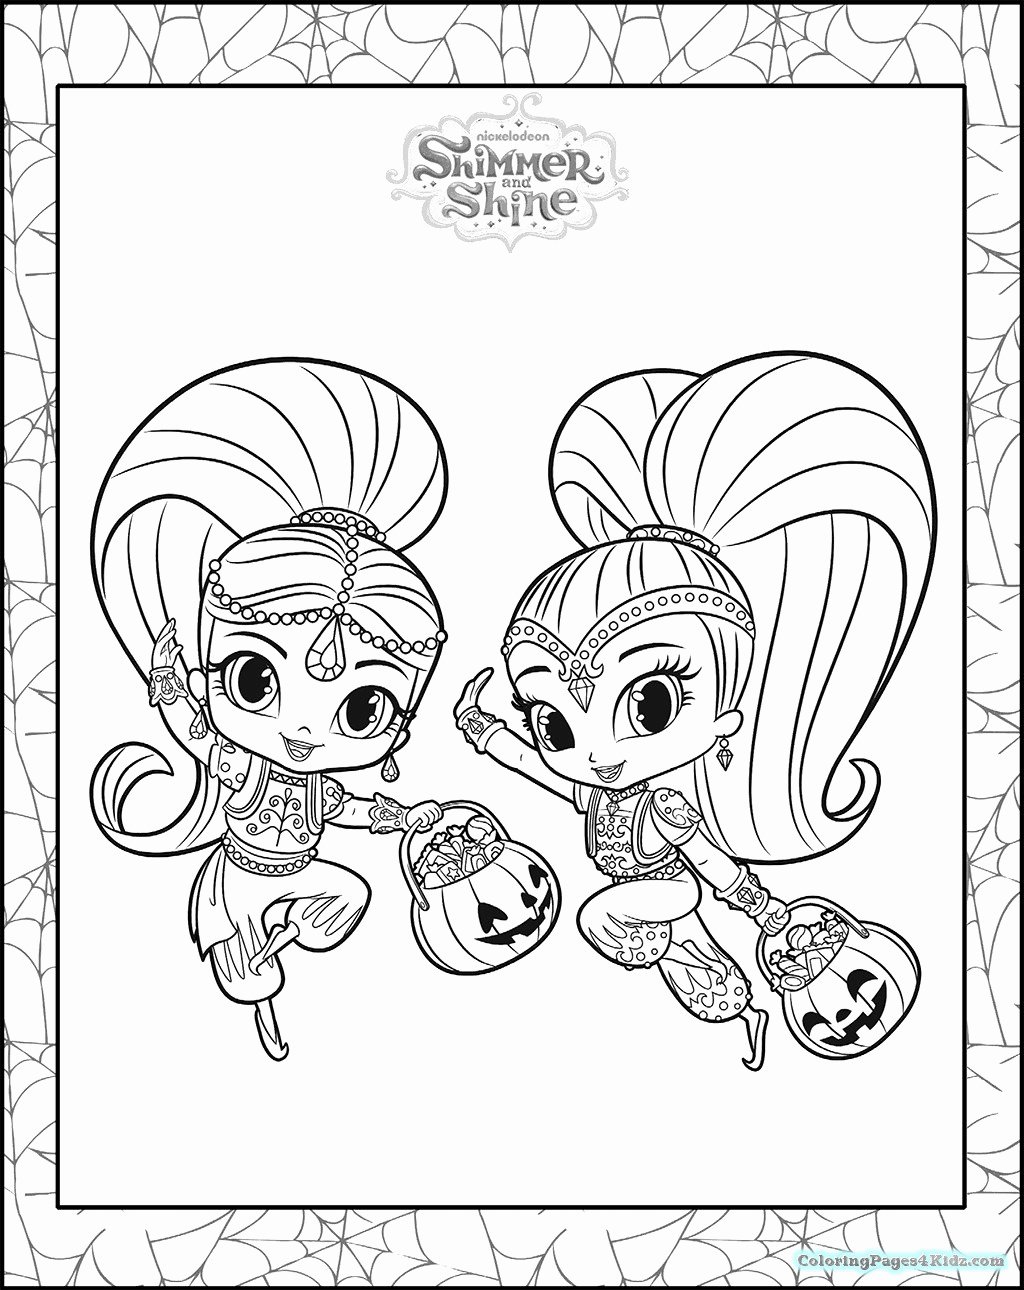 602 Cute Shimmer Coloring Page with Animal character